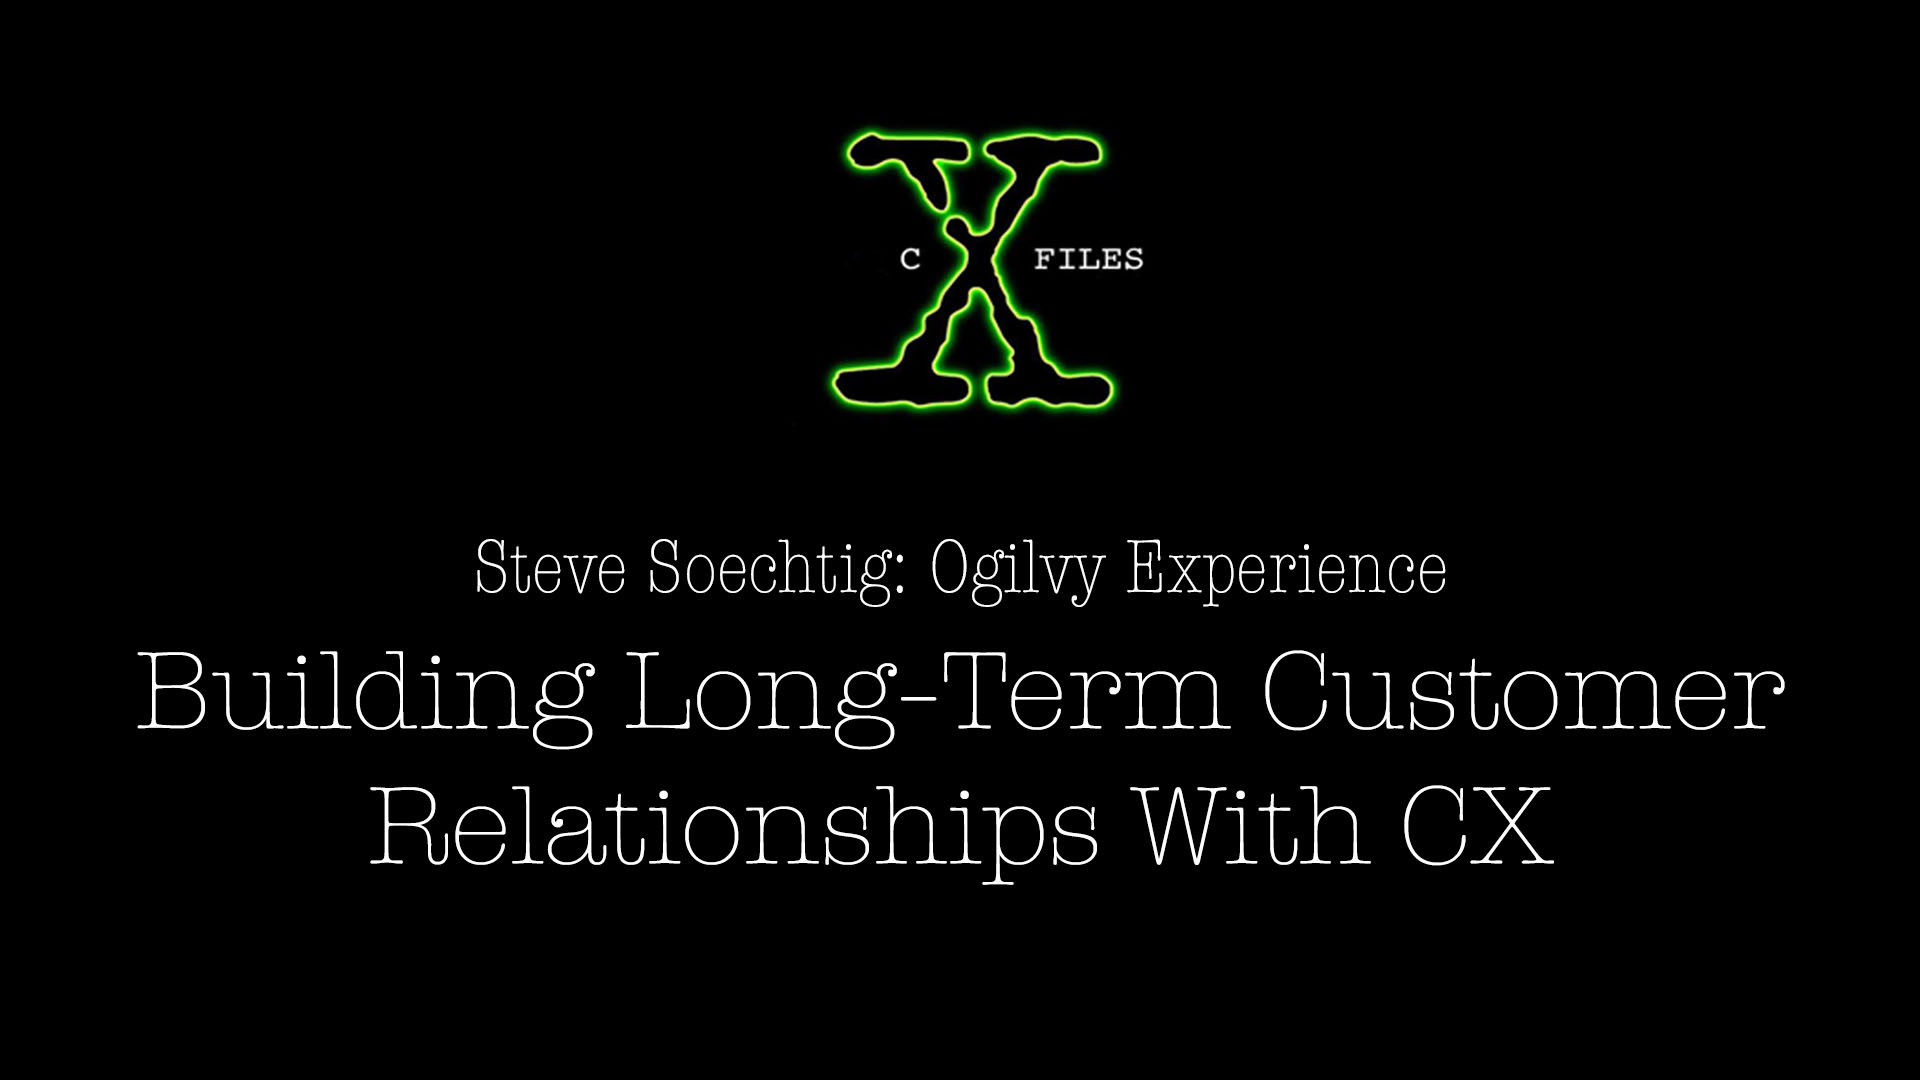 CX Files Podcast: Building Long-Term Customer Relationships With CX